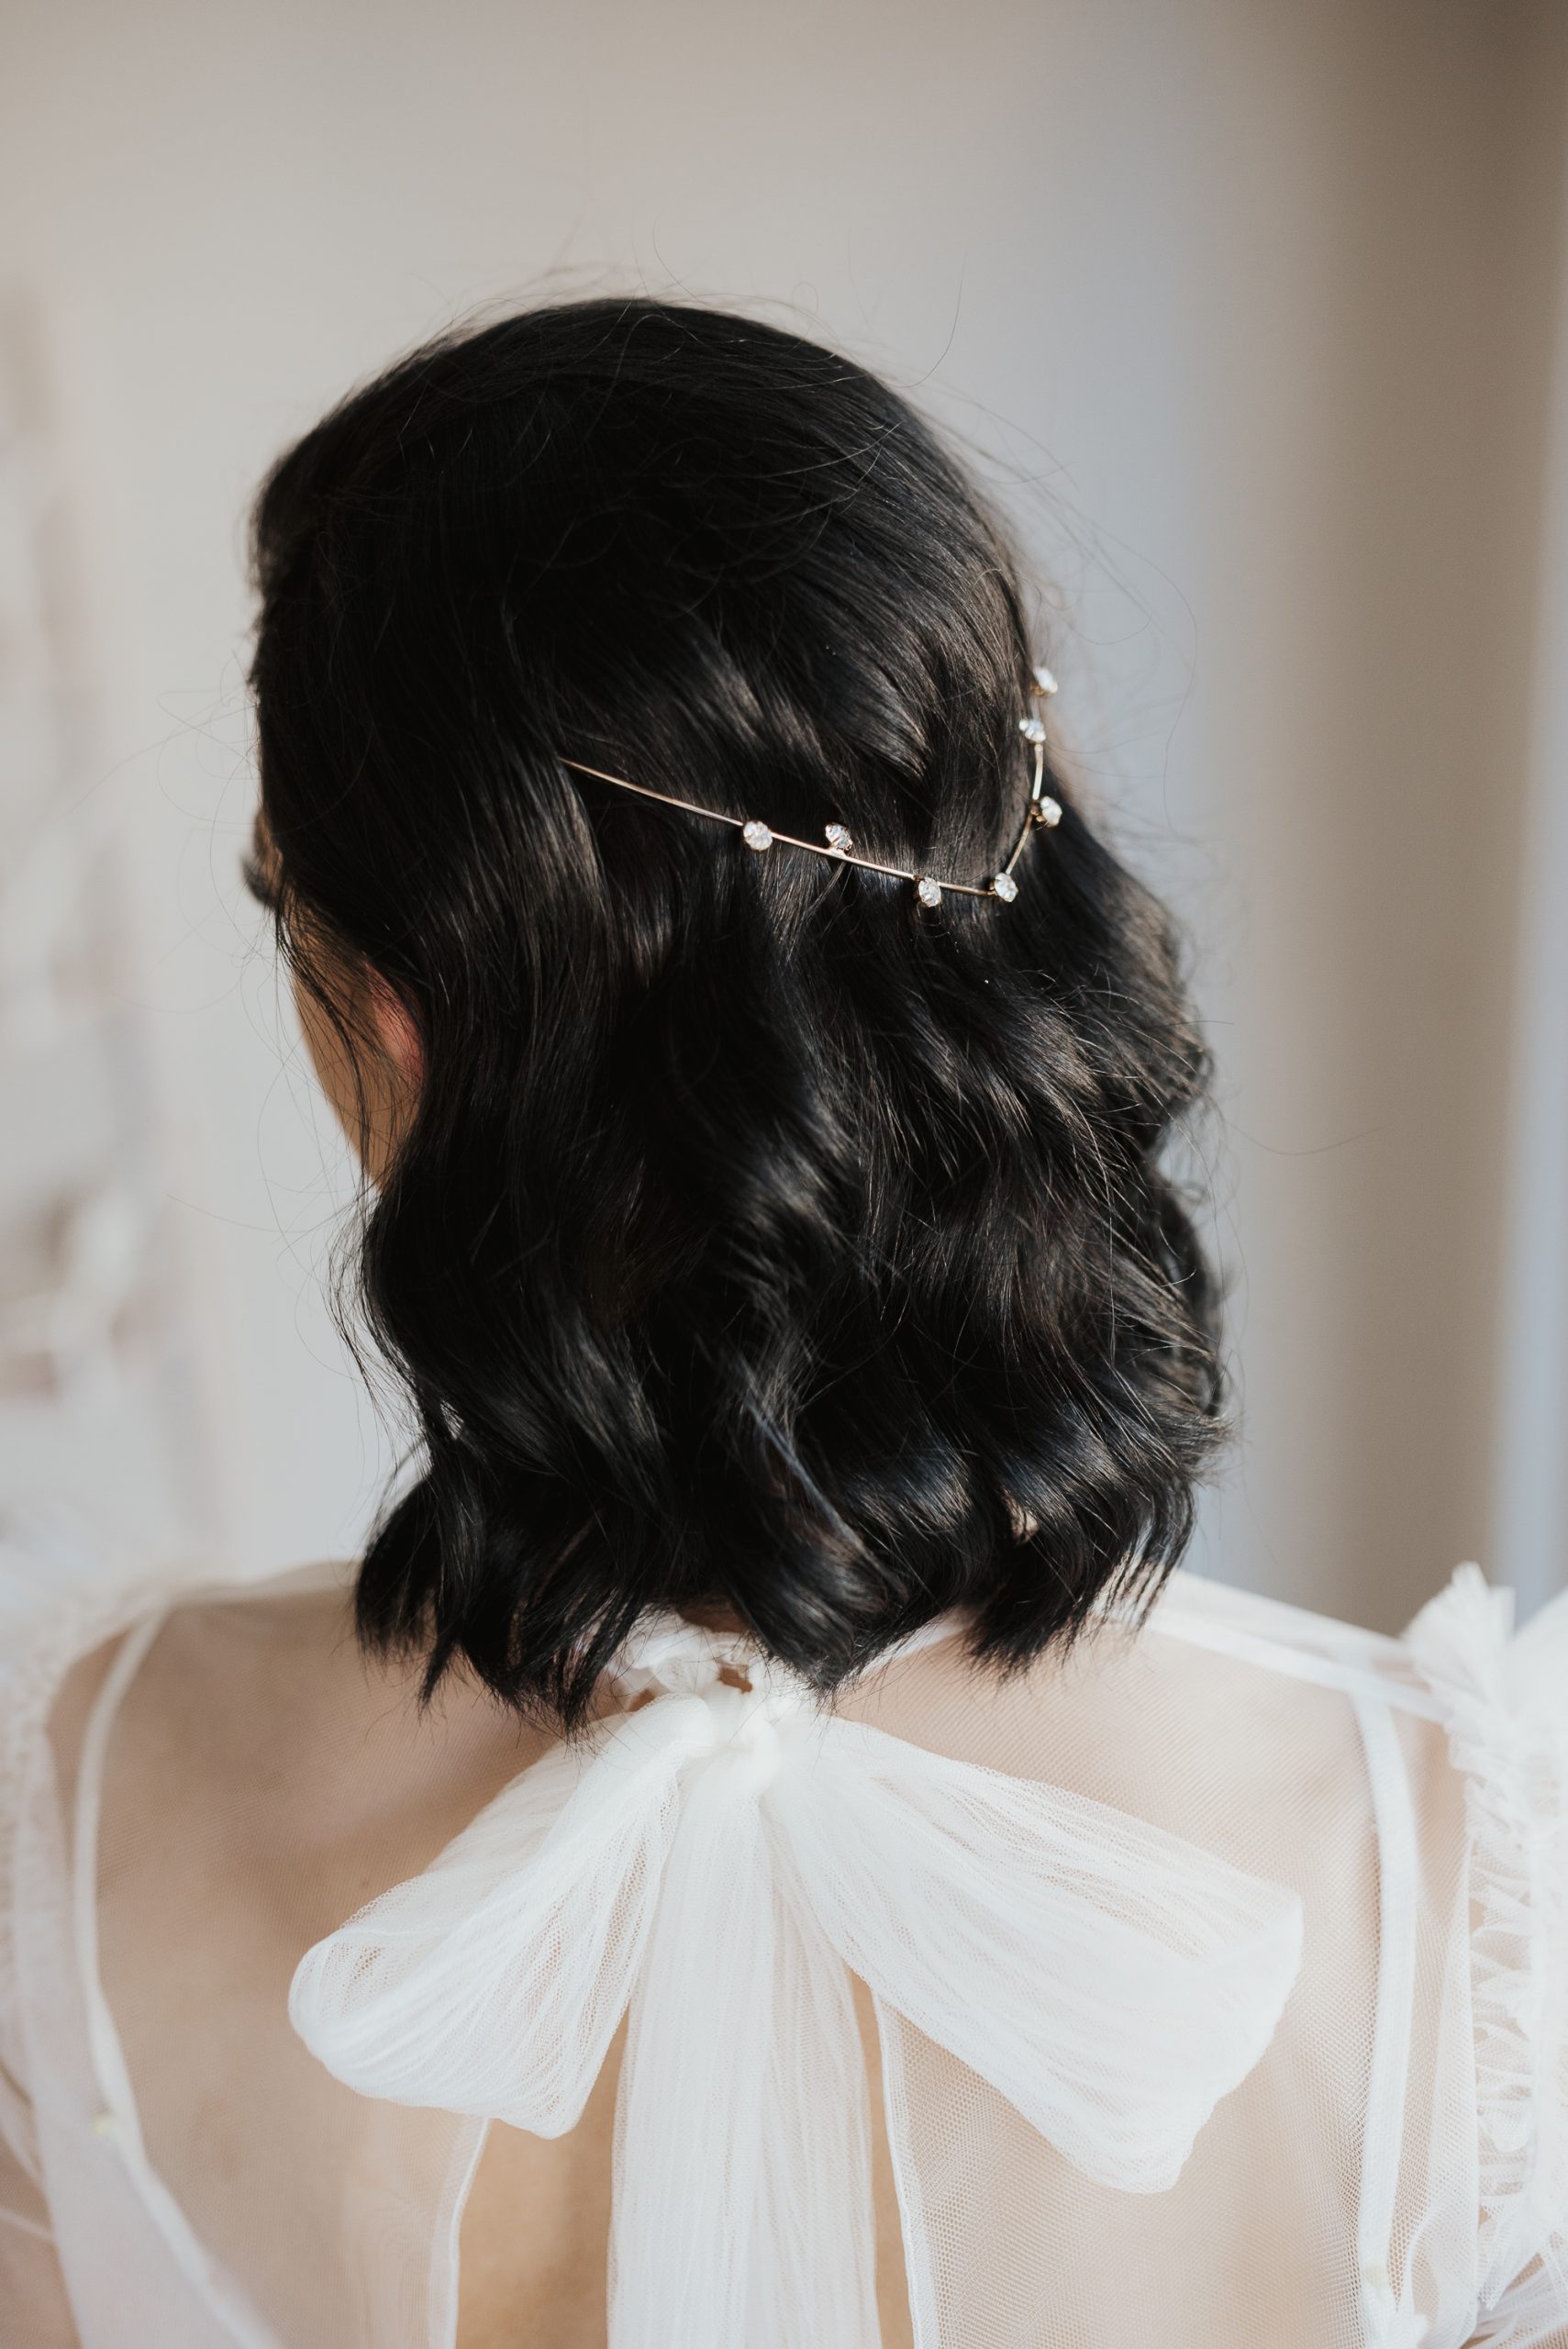 Designed and decorated to perfection this gold and diamond headband can sit delicately on your head or be woven together with your hair to create an elegant and dreamy hairstyle. A simple, yet very elegant accessory that is made using high-quality gold and crystals.